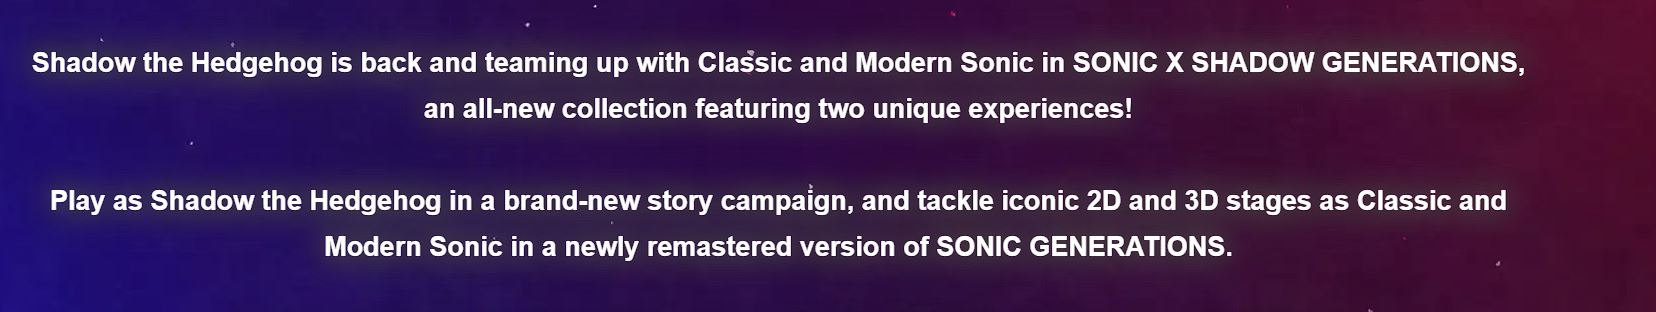 Sonic Generations official synopsis.